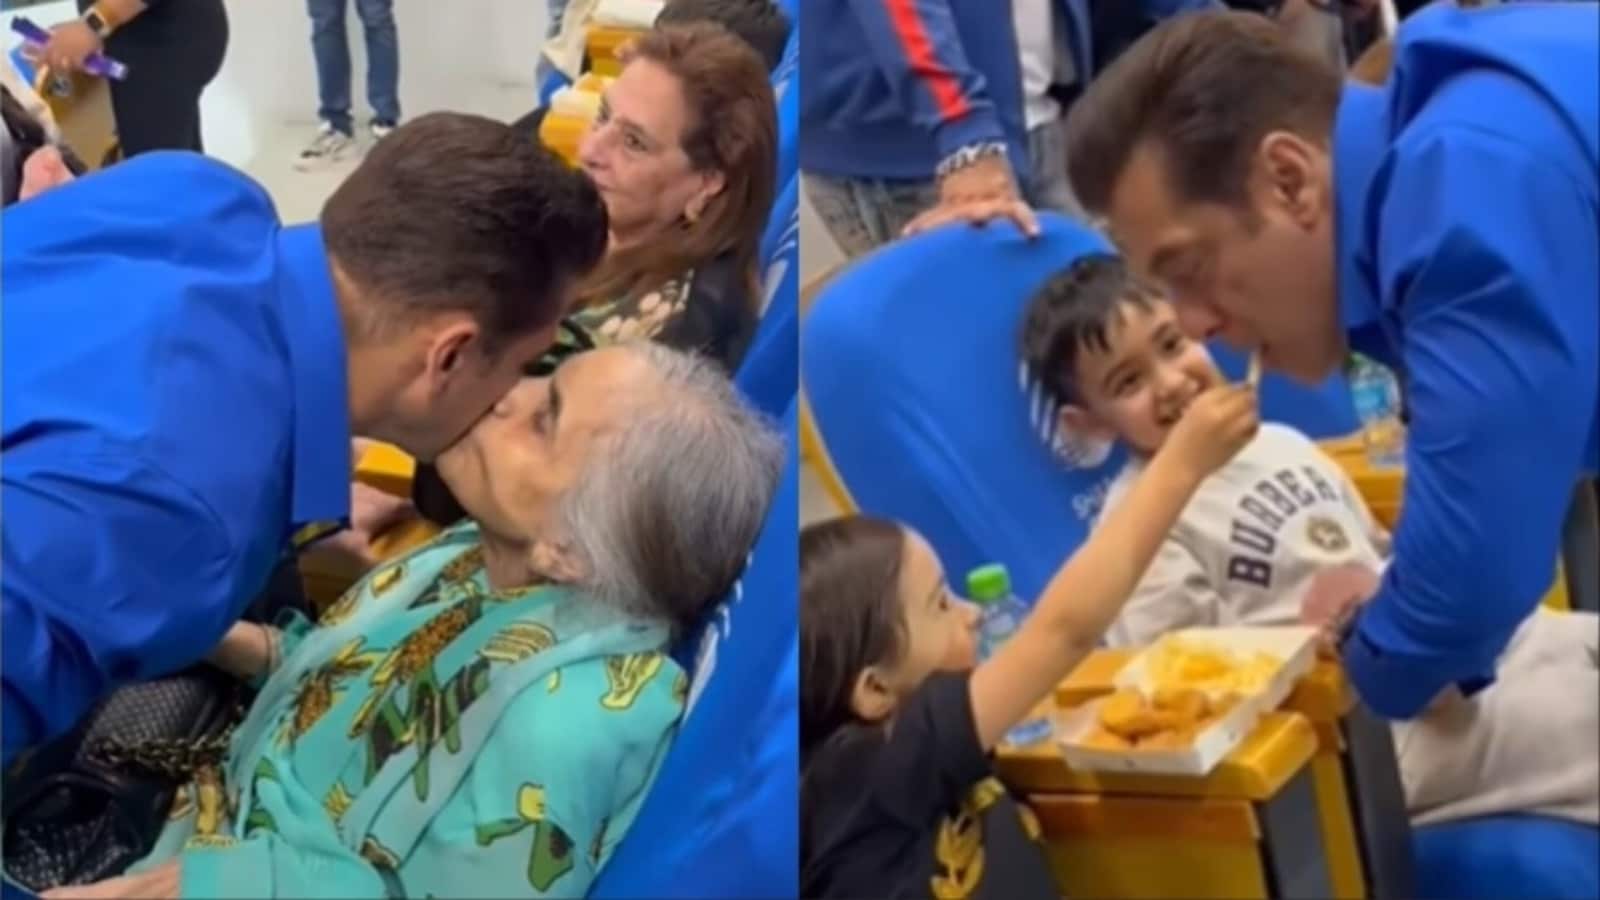 Salman Khan's mom kisses him, niece Ayat feeds him fries at Sharjah's CCL event; actor poses with Abdu Rozik. Watch - Hindustan Times